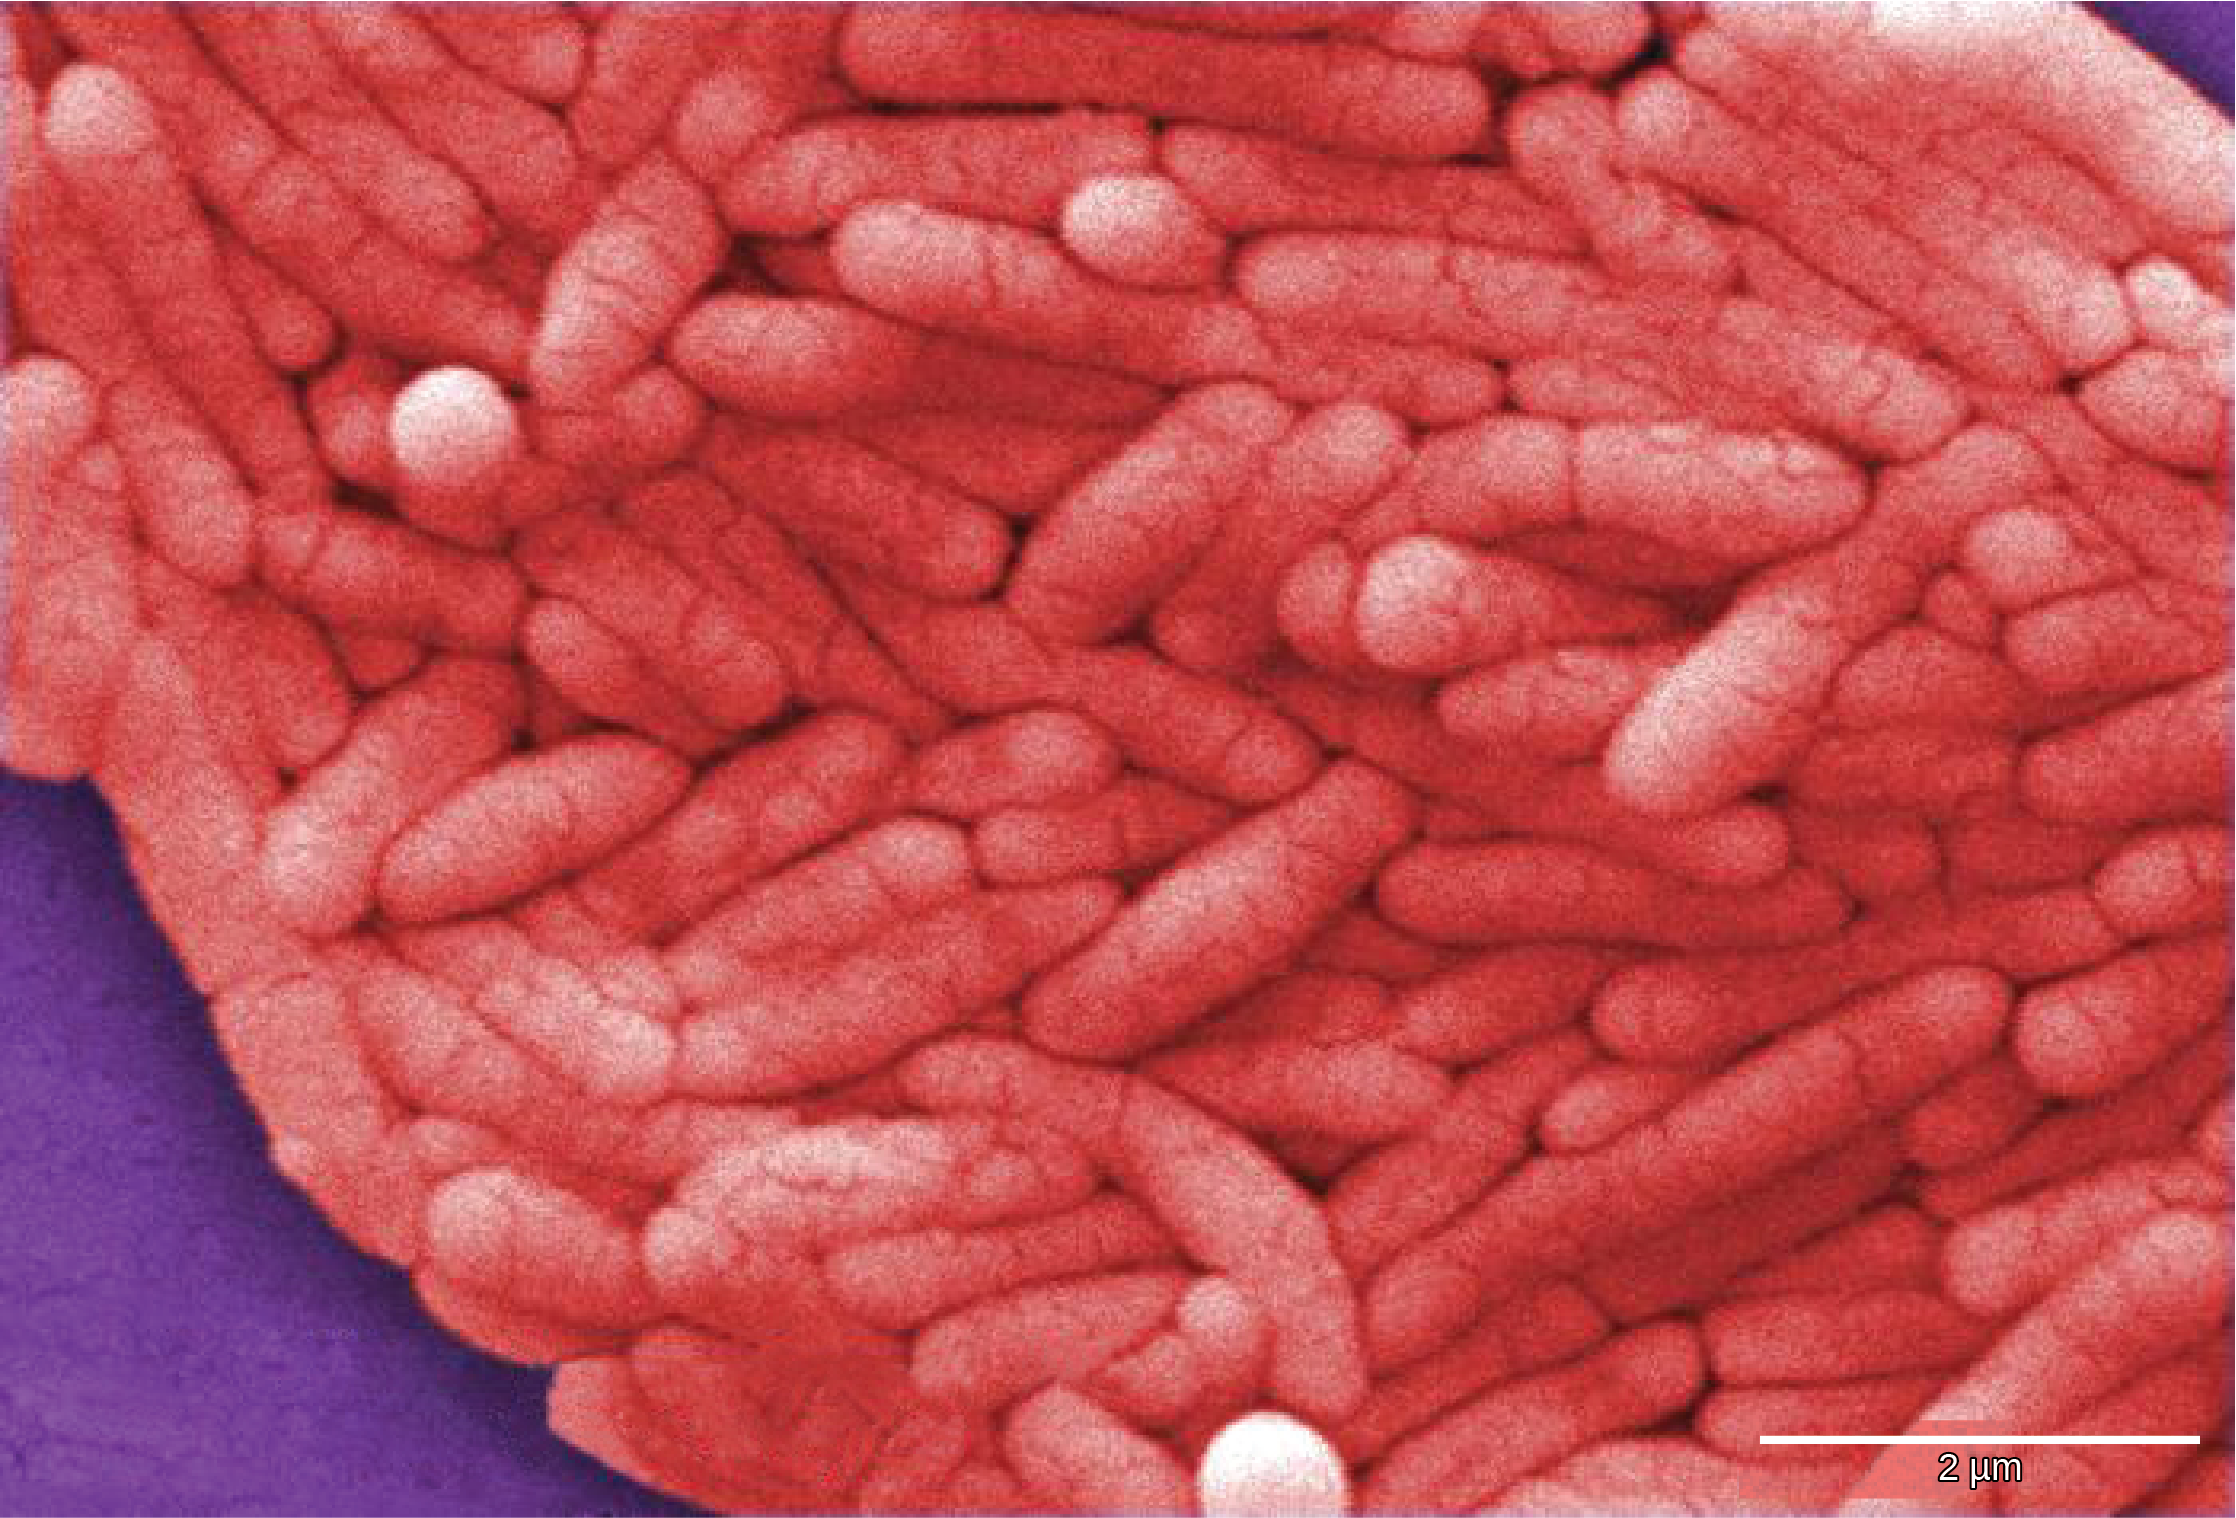 Micrograph shows pink rod-shaped bacteria.